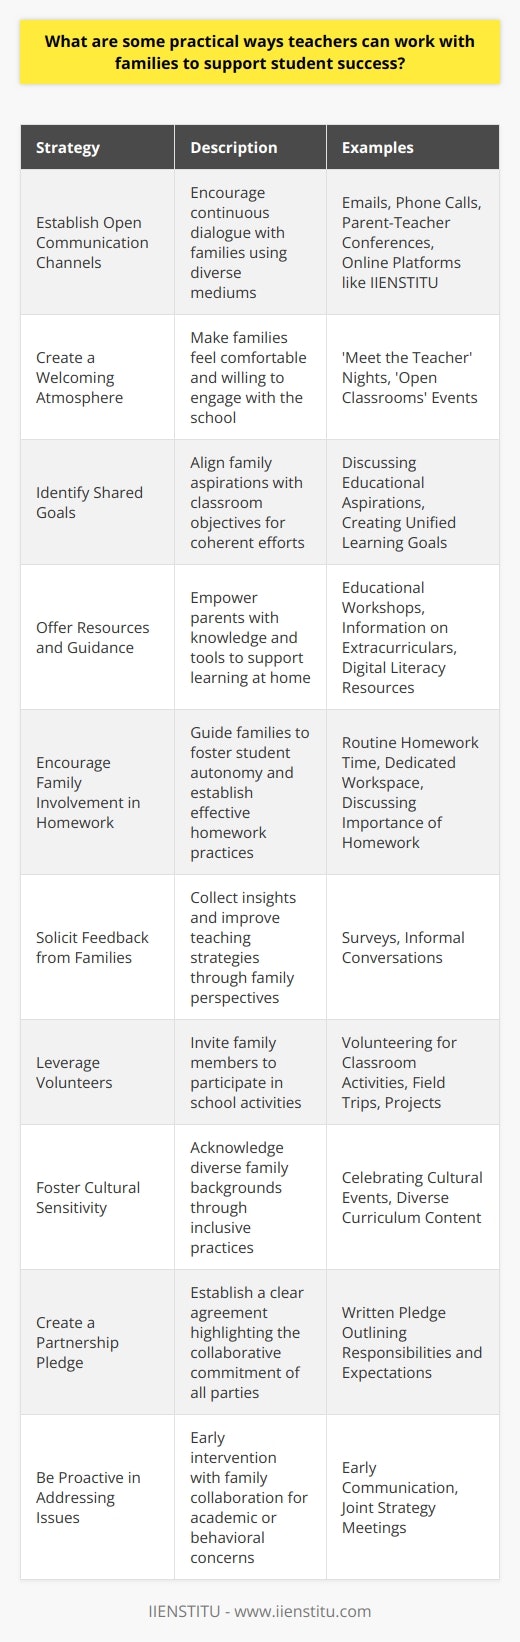 Supporting student success is a collaborative effort that extends beyond the classroom, involving partnerships between teachers and families. Here are practical strategies for teachers to effectively work with families in support of their students' academic and personal growth:1. Establish Open Communication Channels:Communication is the cornerstone of any successful partnership. Teachers can encourage consistent dialogue by setting up regular communication through email, phone calls, and parent-teacher conferences. Online platforms, like IIENSTITU, offer tools and systems where teachers can provide updates on student progress and classroom activities, ensuring a seamless flow of information.2. Create a Welcoming Atmosphere:Fostering a friendly and inclusive environment in the school can make families feel more comfortable and willing to engage. Teachers can organize events like 'meet the teacher' nights or 'open classrooms' which give parents an insight into the learning environment and build trust.3. Identify Shared Goals:During interactions with families, teachers should seek to understand their aspirations for their child's education and align them with the goals of the classroom. This unified approach ensures that both teachers and families are working towards common objectives.4. Offer Resources and Guidance:Not all families have the same level of educational background or knowledge about navigating the school system. Providing resources on how to support learning at home or information about extracurricular activities can empower parents to become more involved. Additionally, workshops or informational sessions on topics like digital literacy or college planning can be beneficial.5. Encourage Family Involvement in Homework:Teachers can guide families on how to assist with homework in ways that promote student autonomy. This may include establishing a routine homework time, providing a quiet workspace, and discussing the importance of homework with both the students and their families.6. Solicit Feedback from Families:Teachers can gather insights and perspectives from families through surveys or informal conversations, showing respect for their views and experiences. This feedback can inform instructional strategies and help in creating a more responsive learning environment.7. Leverage Volunteers:Many parents and family members are eager to contribute their time and skills to improve the school experience. Inviting family volunteers for classroom activities, field trips, or special projects can enhance the educational experience for all students.8. Foster Cultural Sensitivity:In recognizing the diverse backgrounds of families, teachers should demonstrate cultural sensitivity and inclusiveness in their curriculum and communication. Celebrating different cultures and traditions in the classroom encourages a sense of community and belonging.9. Create a Partnership Pledge:Develop a simple agreement or pledge between teacher, student, and family that outlines the responsibilities and expectations of each party. This can serve as a framework for the collaborative effort and a visible reminder of the shared commitment to student success.10. Be Proactive in Addressing Issues:When academic or behavioral issues arise, teachers should communicate with families early on to strategize solutions together. Proactive communication helps in navigating challenges before they escalate and shows families that the teacher is invested in their child’s success.By engaging in these partnership practices, teachers can harness the strengths of families to support the holistic success of students. Remember, the key is in fostering trust through genuine, empathetic, and respectful collaboration with families.